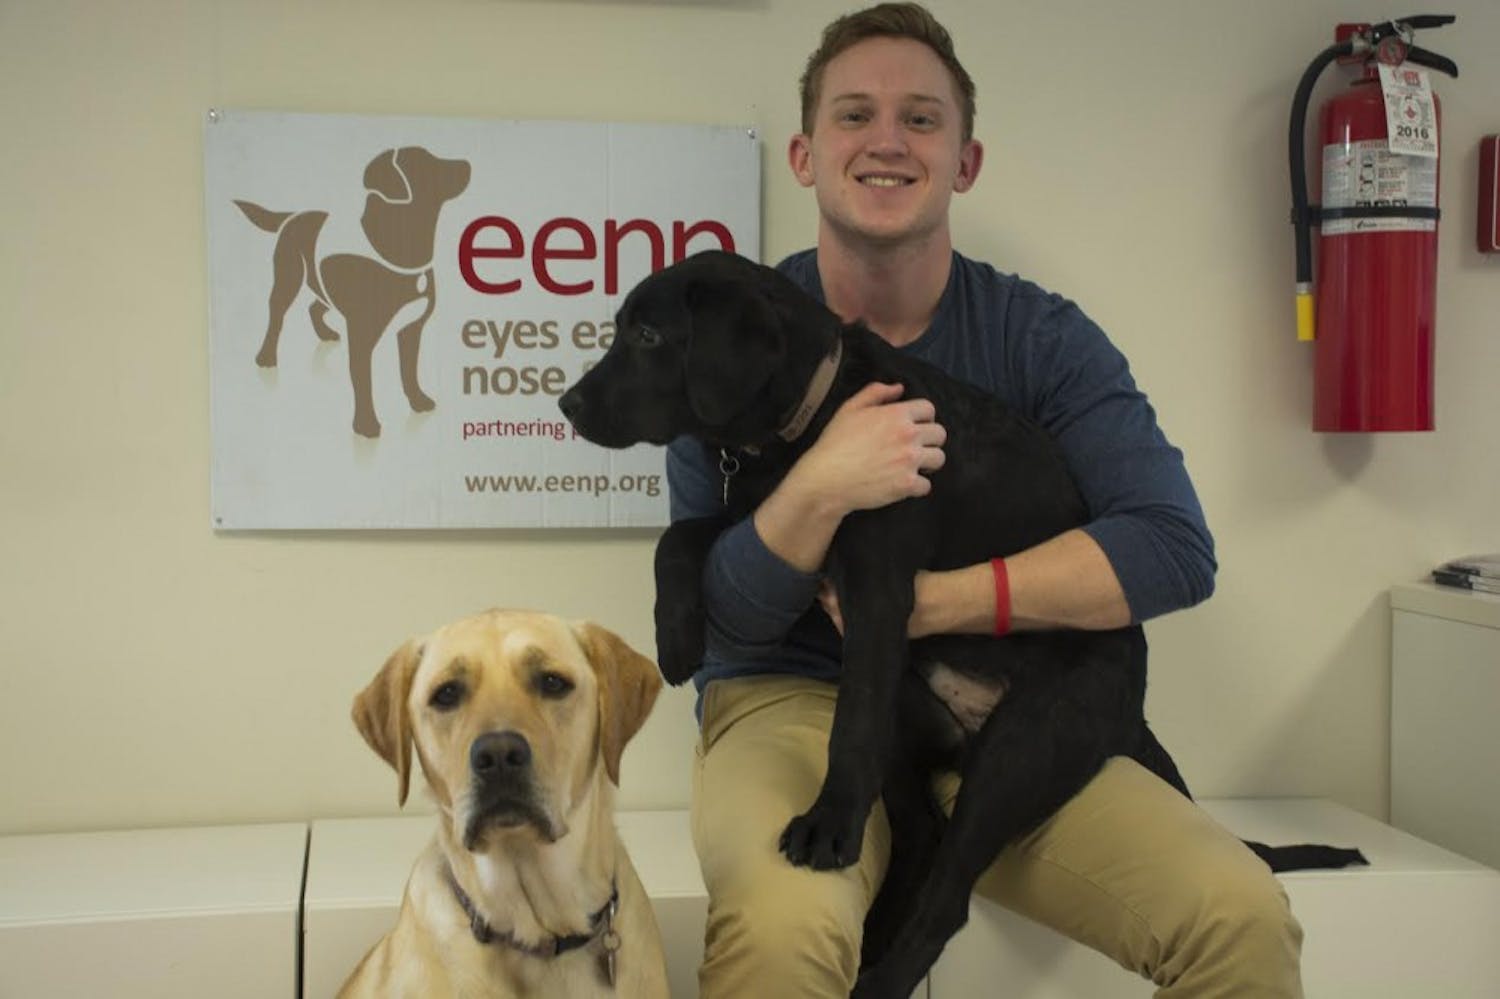 Trevor, a graduate student, is in the process of fundraising to get a medical alert dog for his diabetes.